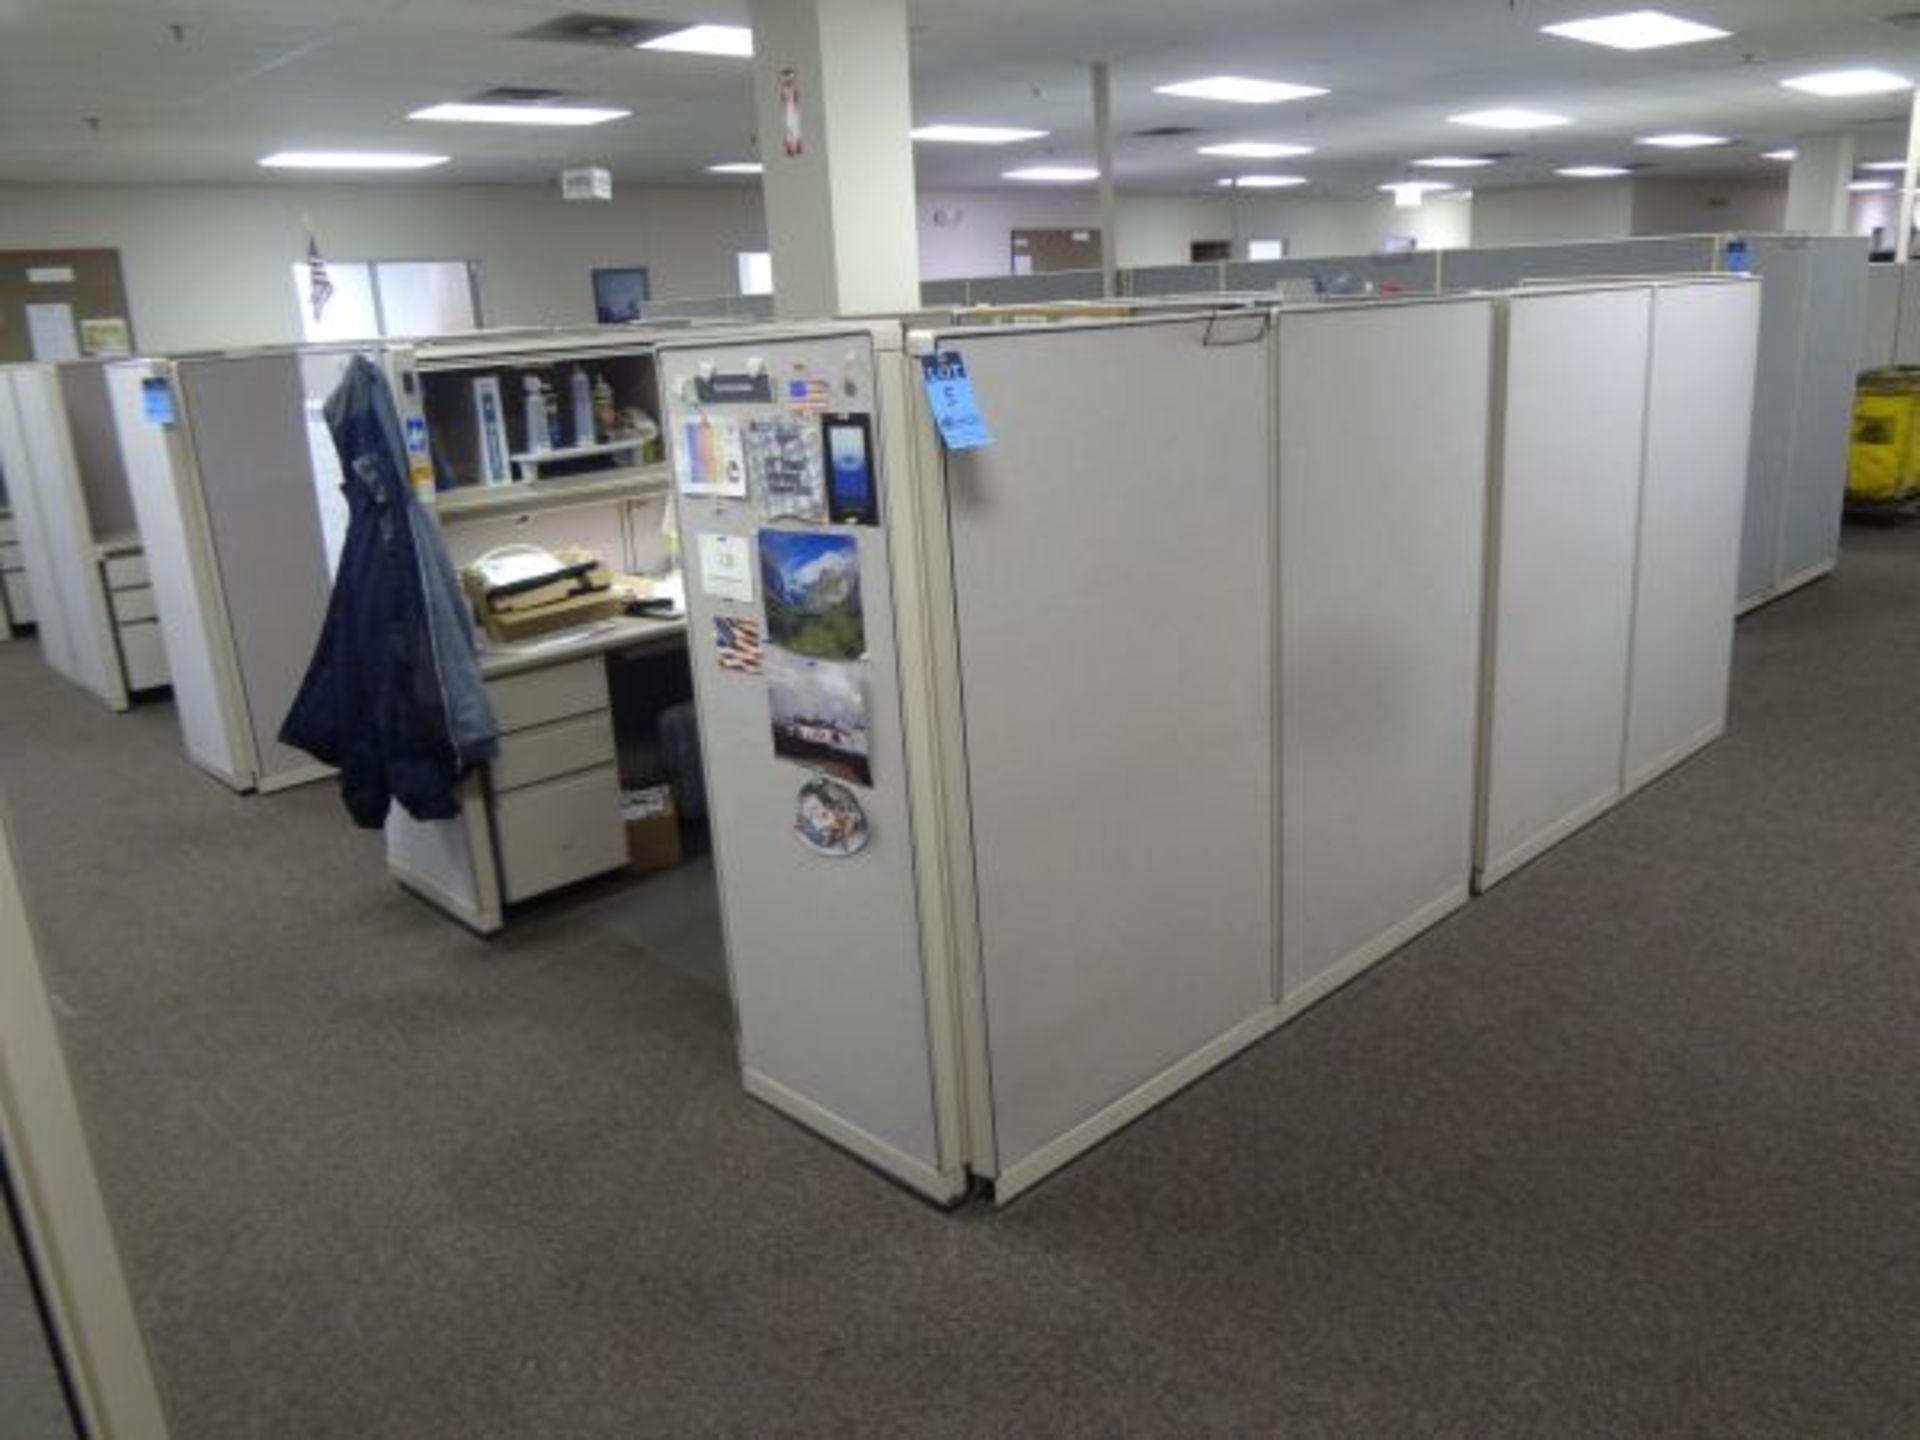 75" X 98" X 61" TWO-PERSON STEELCASE MODULAR OFFICE INCLUDING (2) OVERHEAD CABINETS, (1) 3-DRAWER